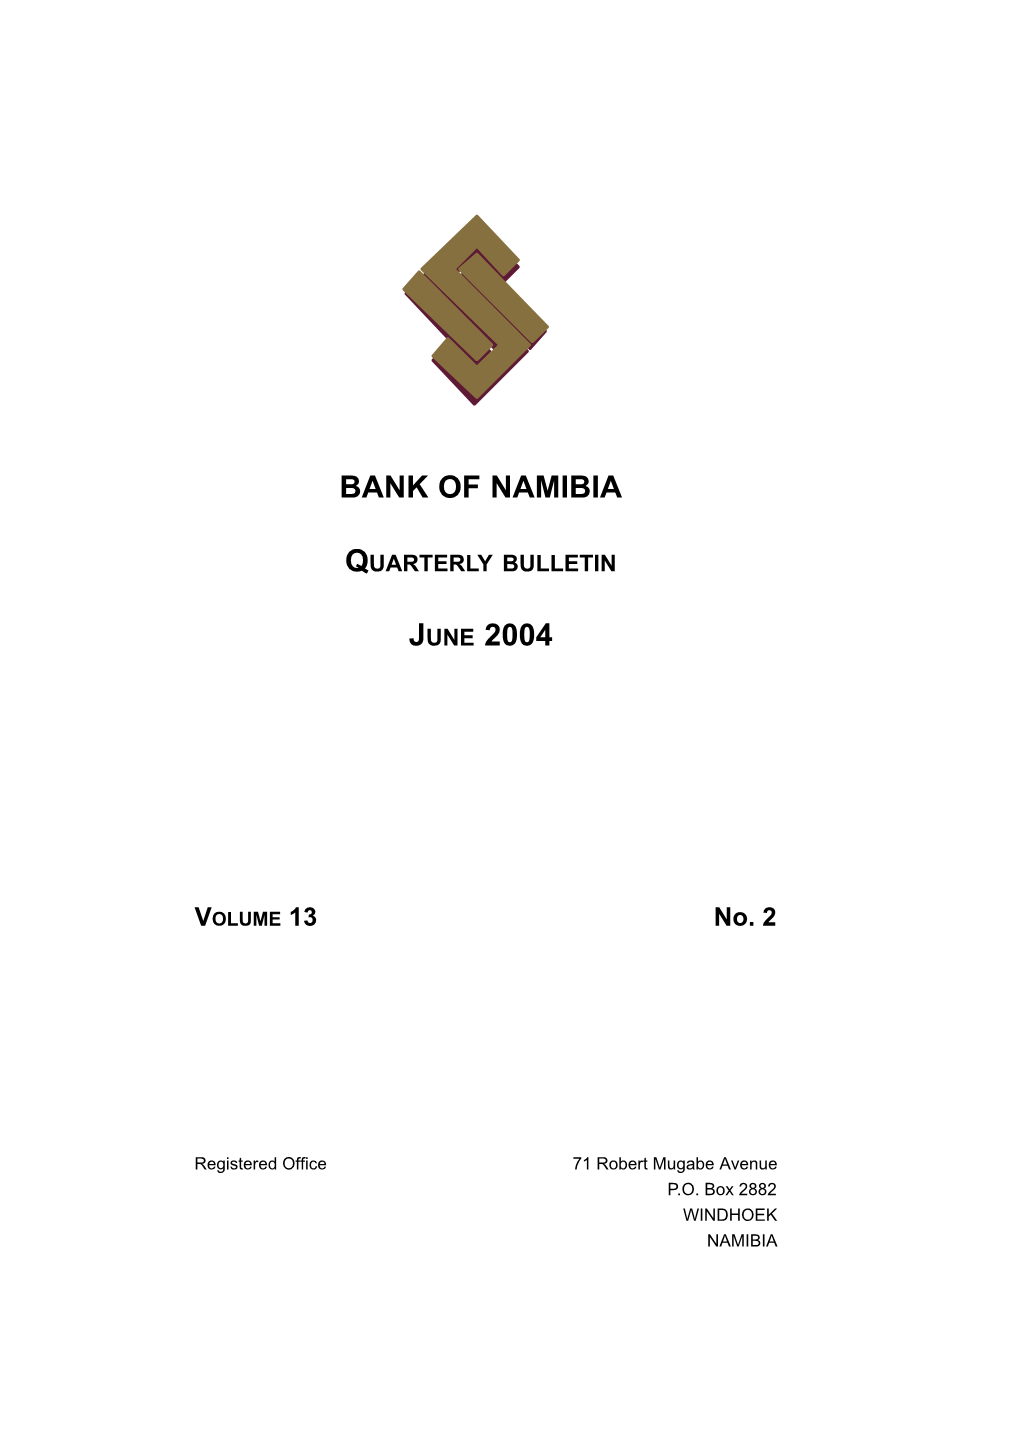 Bank of Namibia Corporate Charter